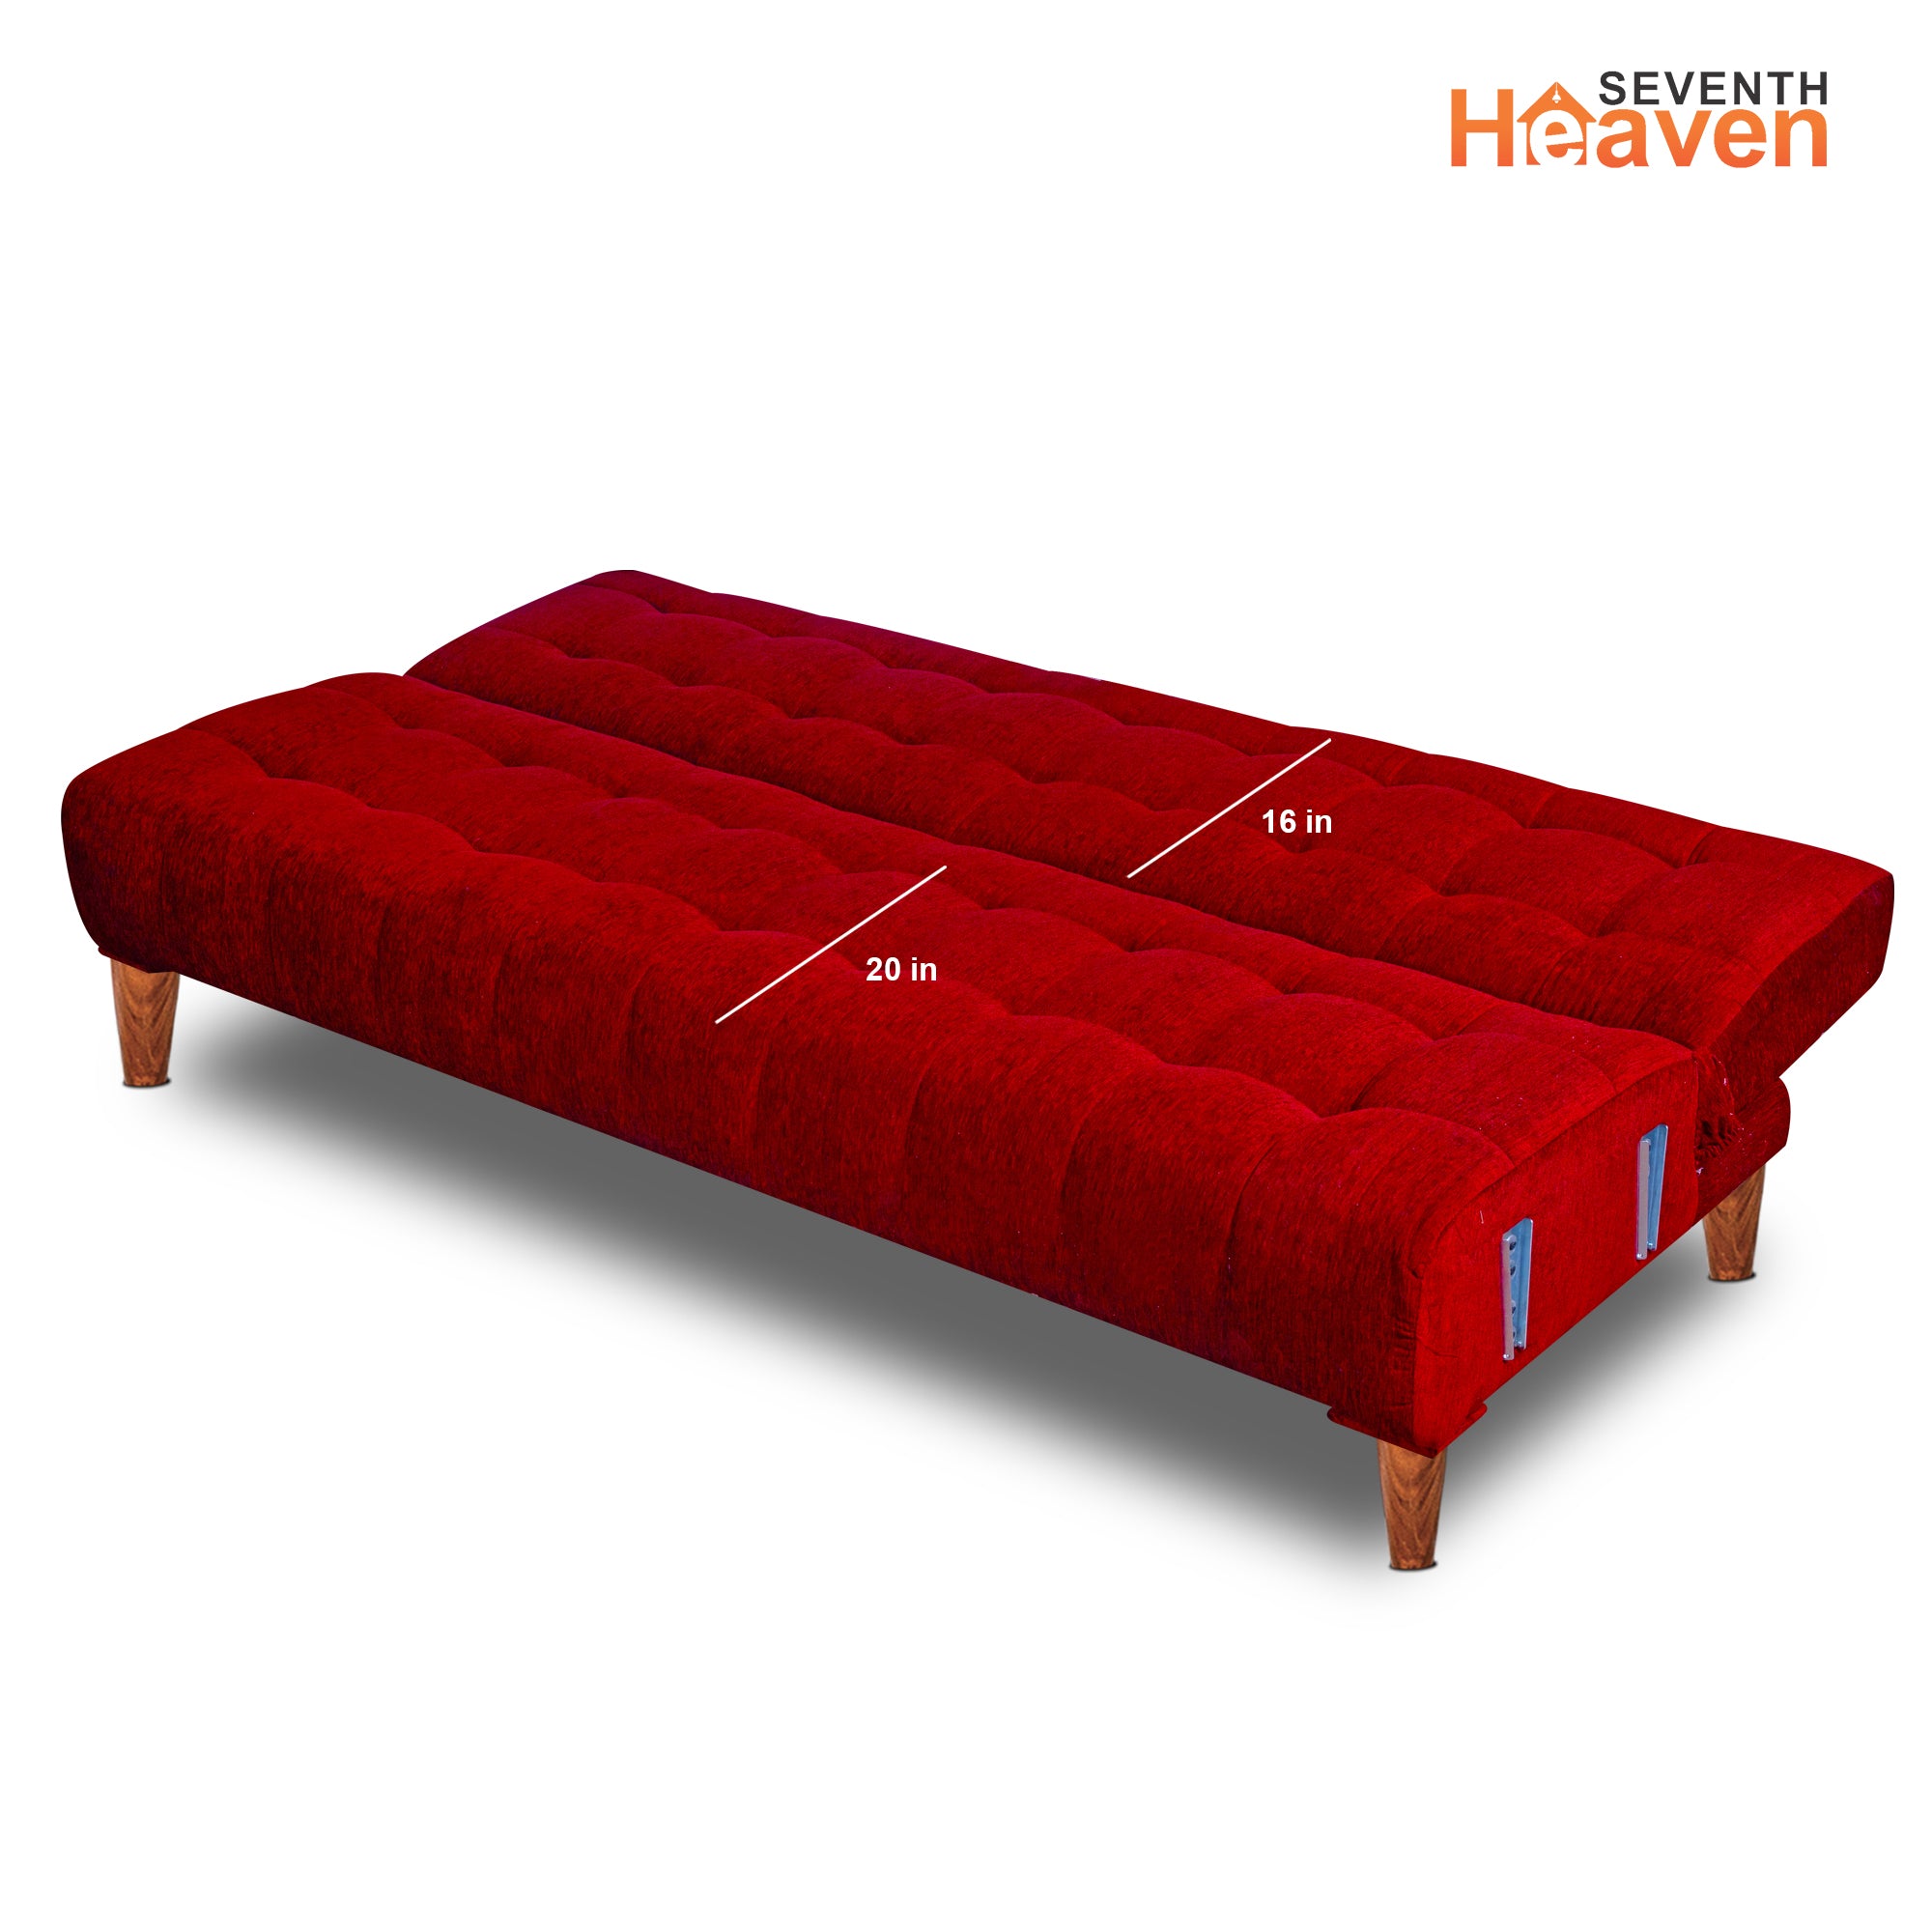 Lisbon Neo 4 Seater (72"X36"X16") Wooden Sofa cum Bed with Armrest Double Solid Wood Maroon